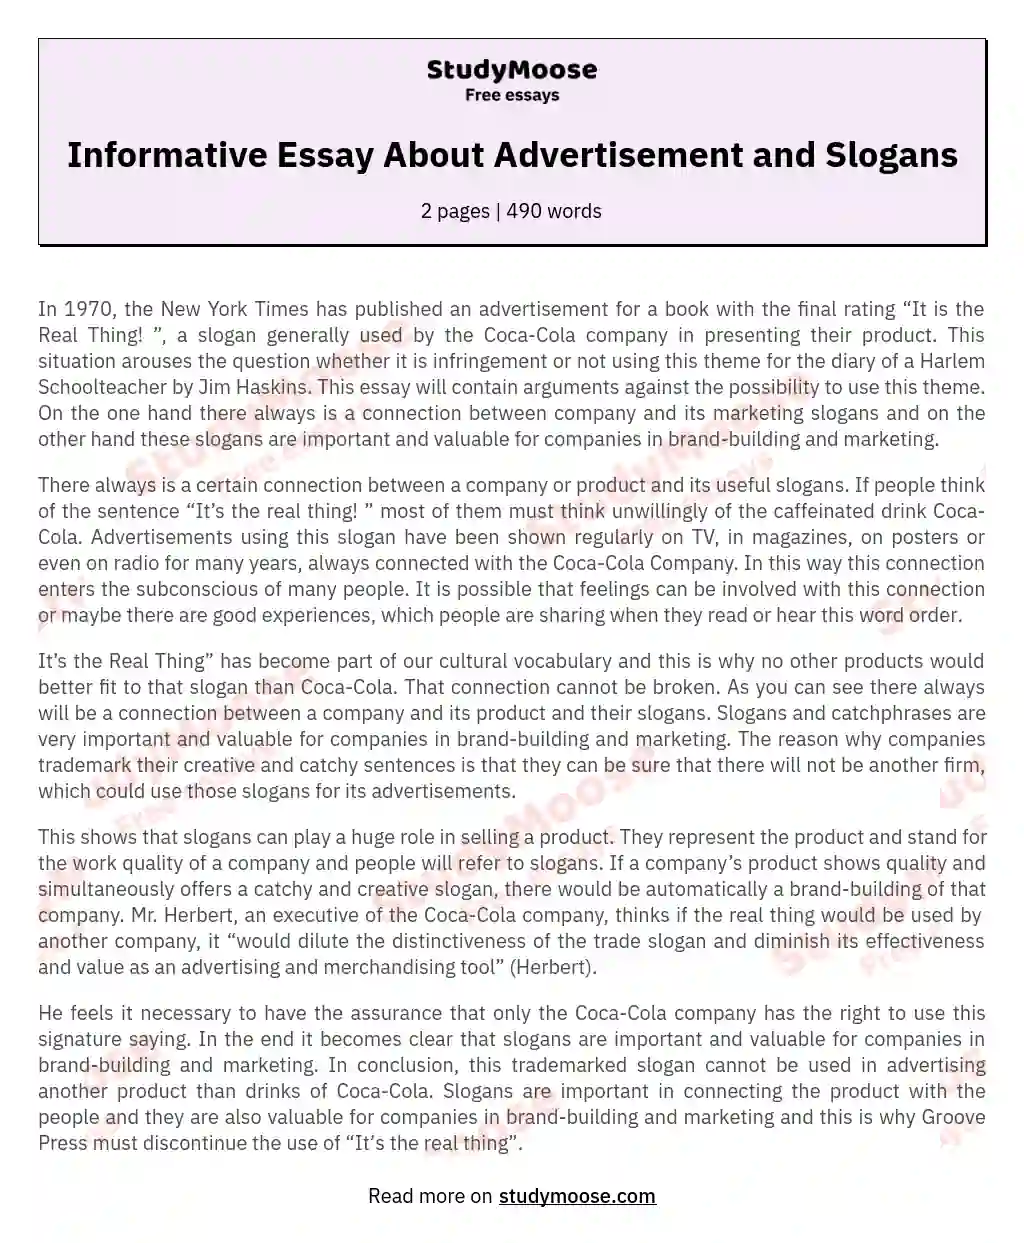 Informative Essay About Advertisement and Slogans